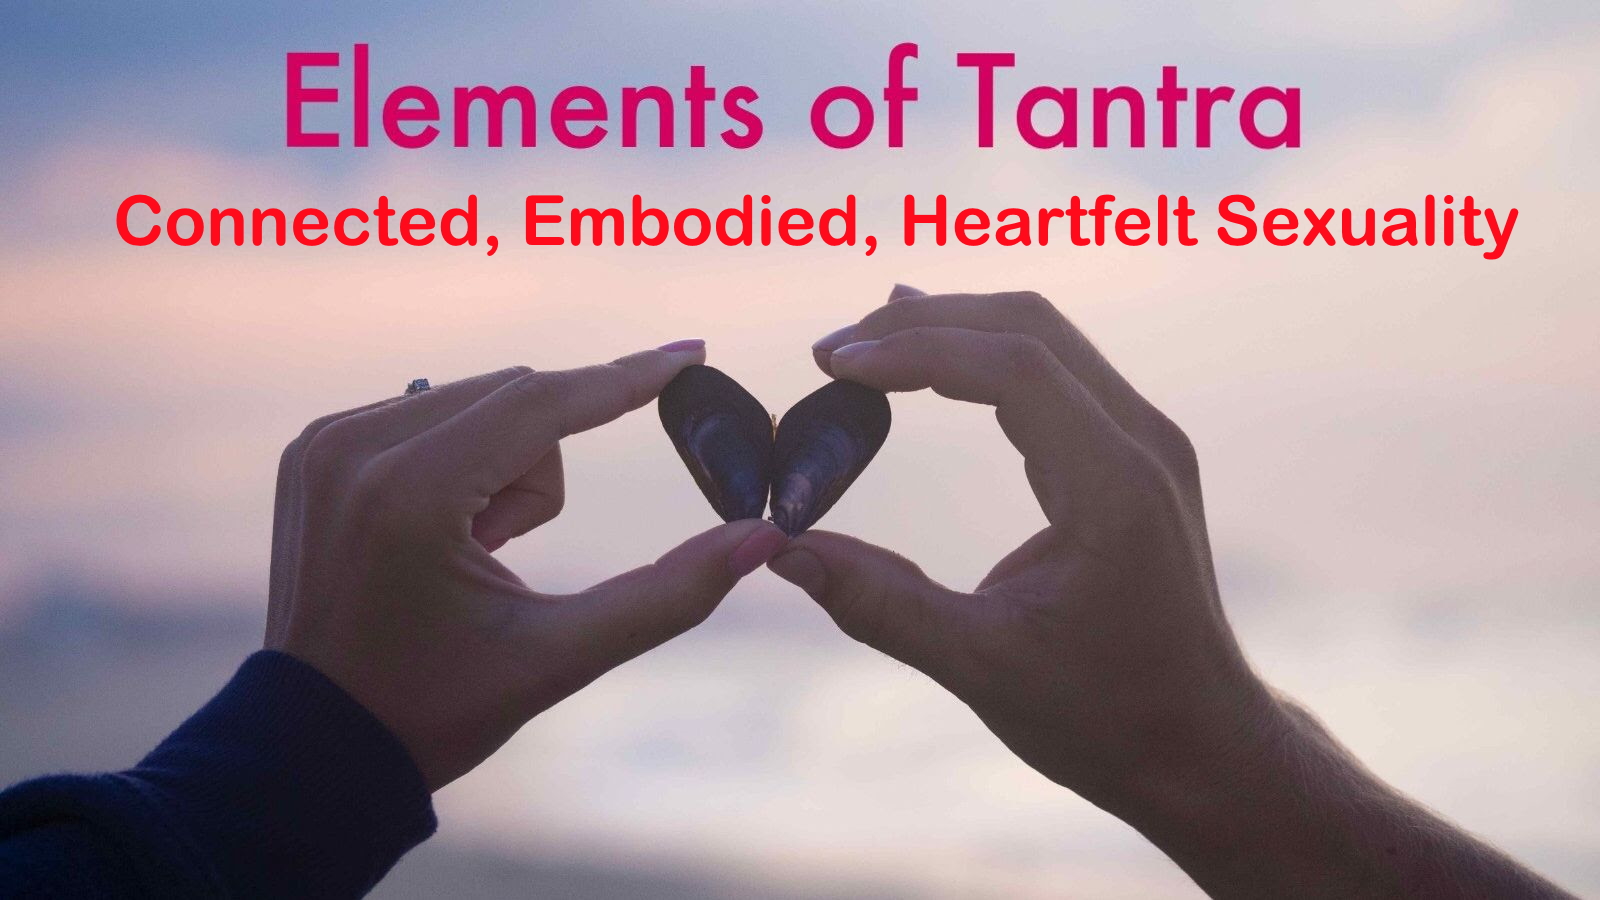 Elements of Tantra: Connected, Embodied, Heartfelt Sexuality, London, United Kingdom